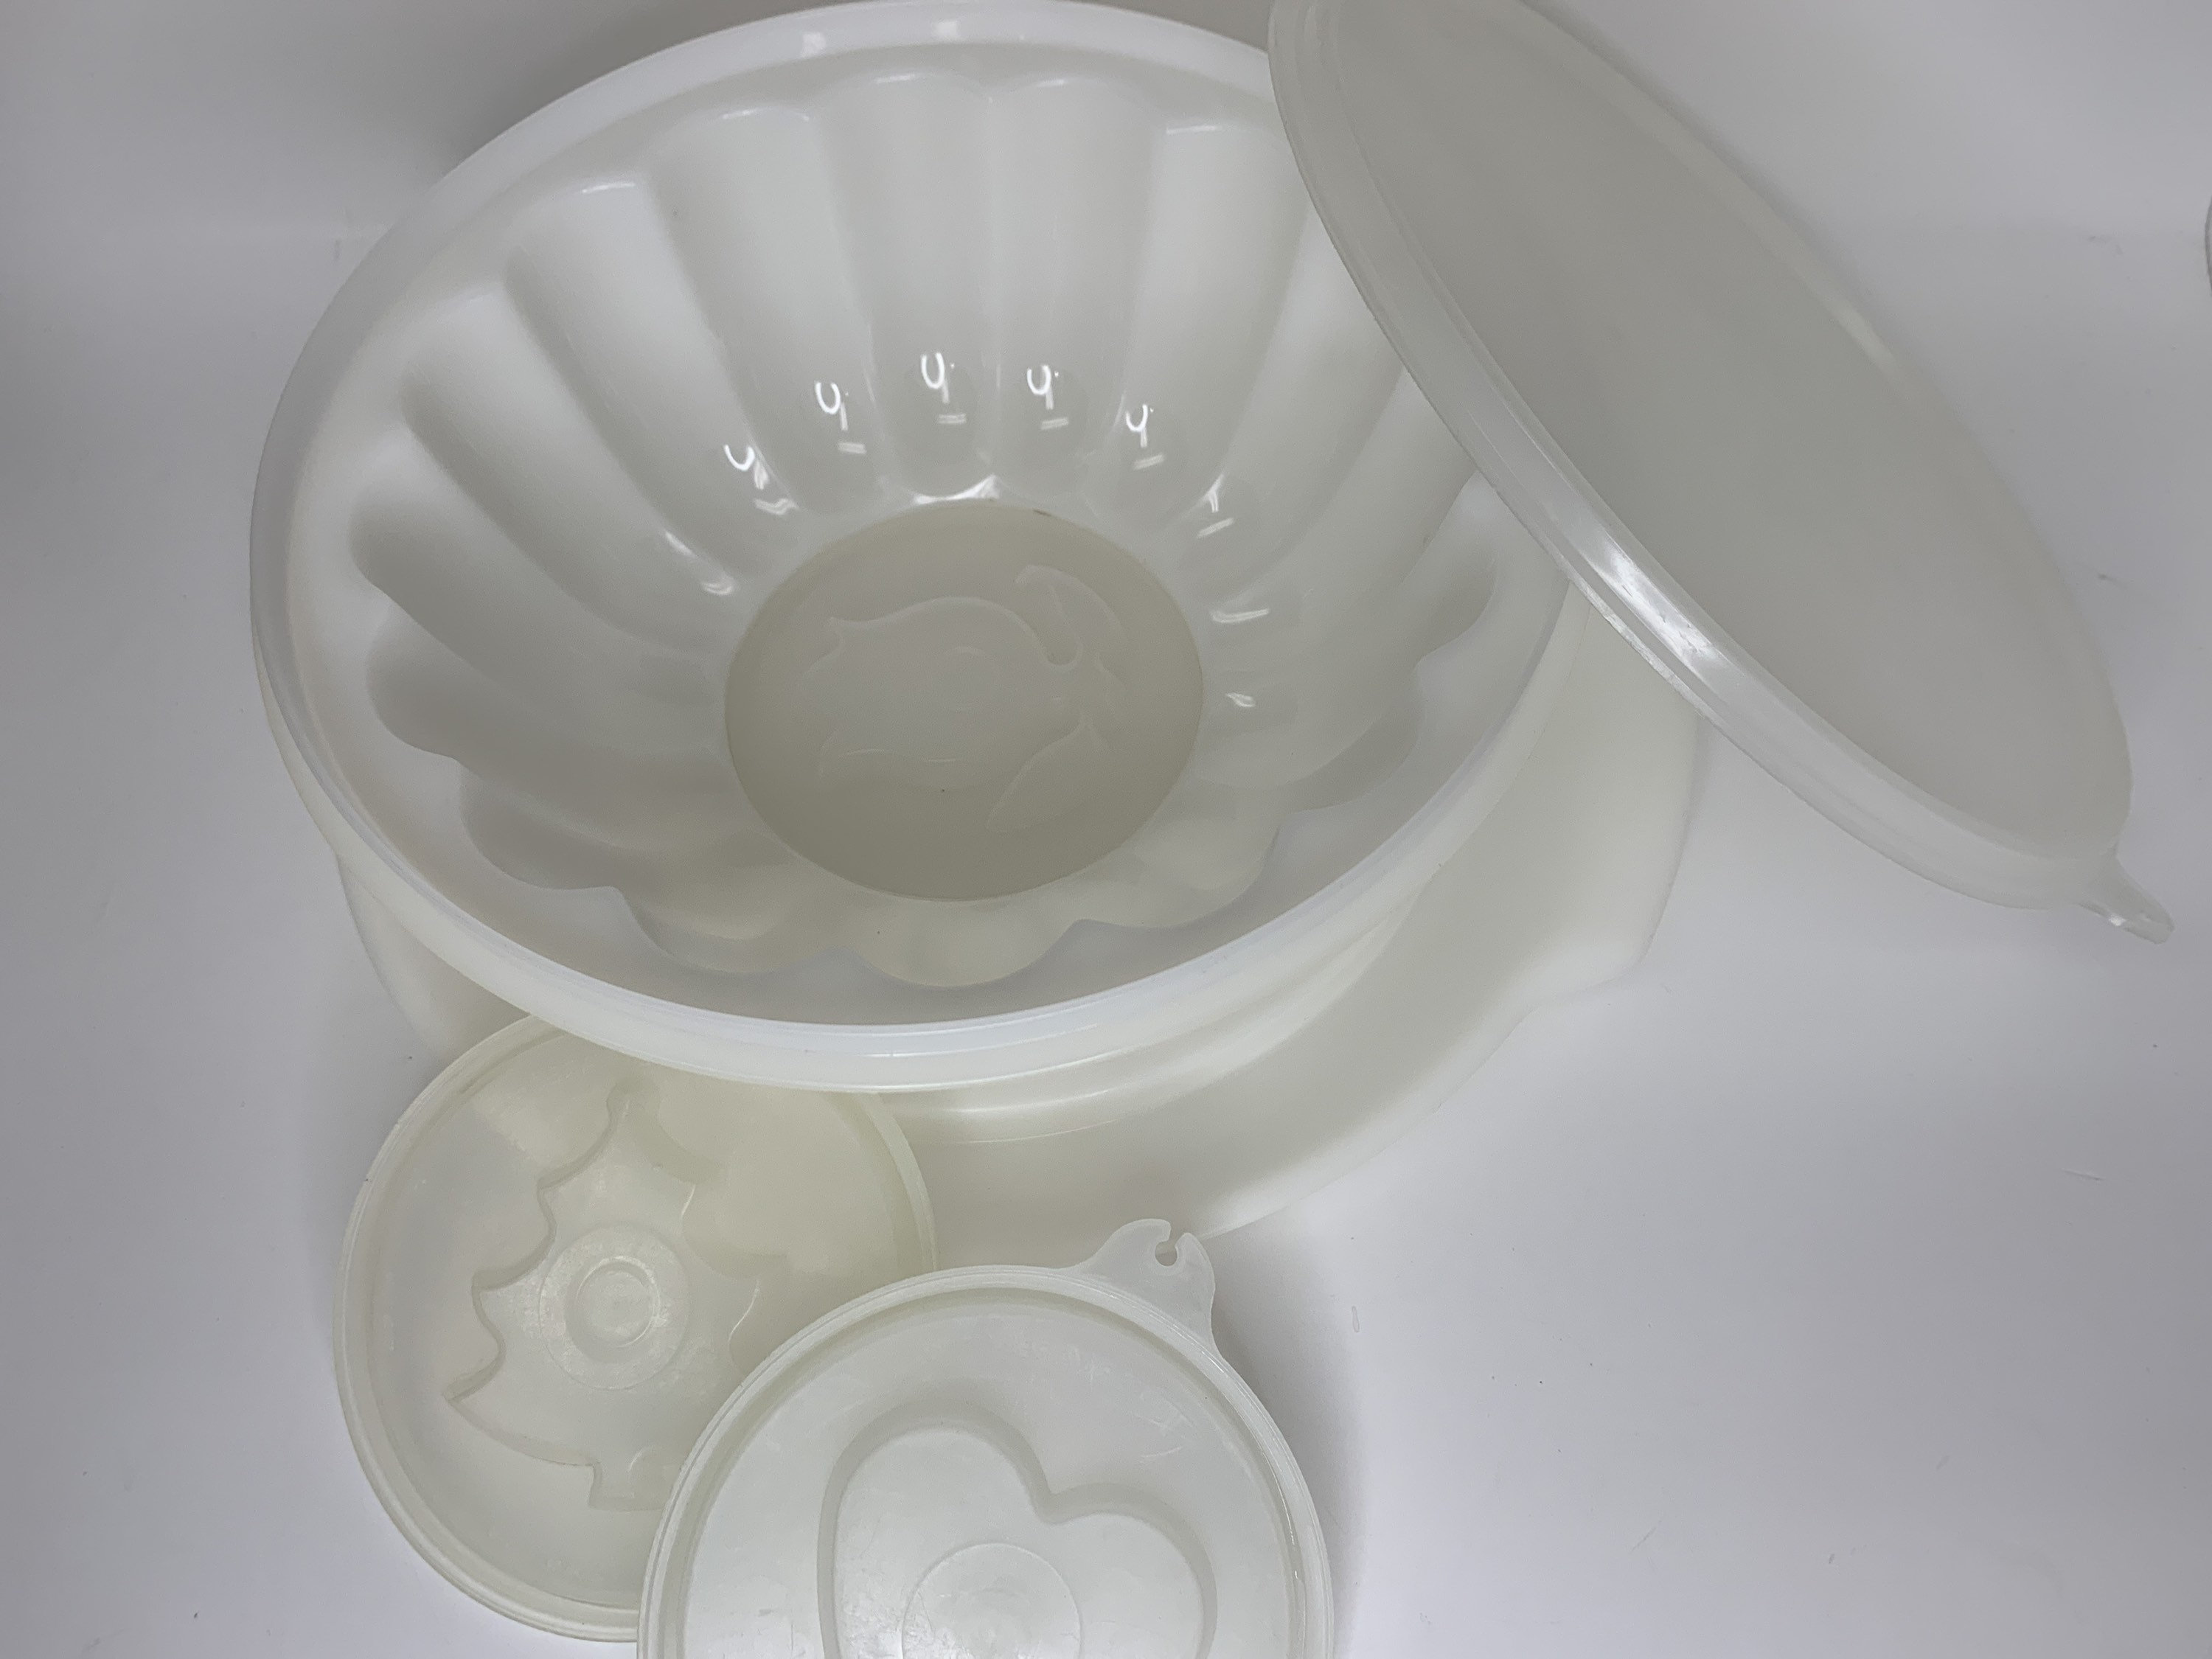 Tupperware Jel-N-Serve Jelly Molds w Star / Heart Design, 2 Available! -  household items - by owner - housewares sale